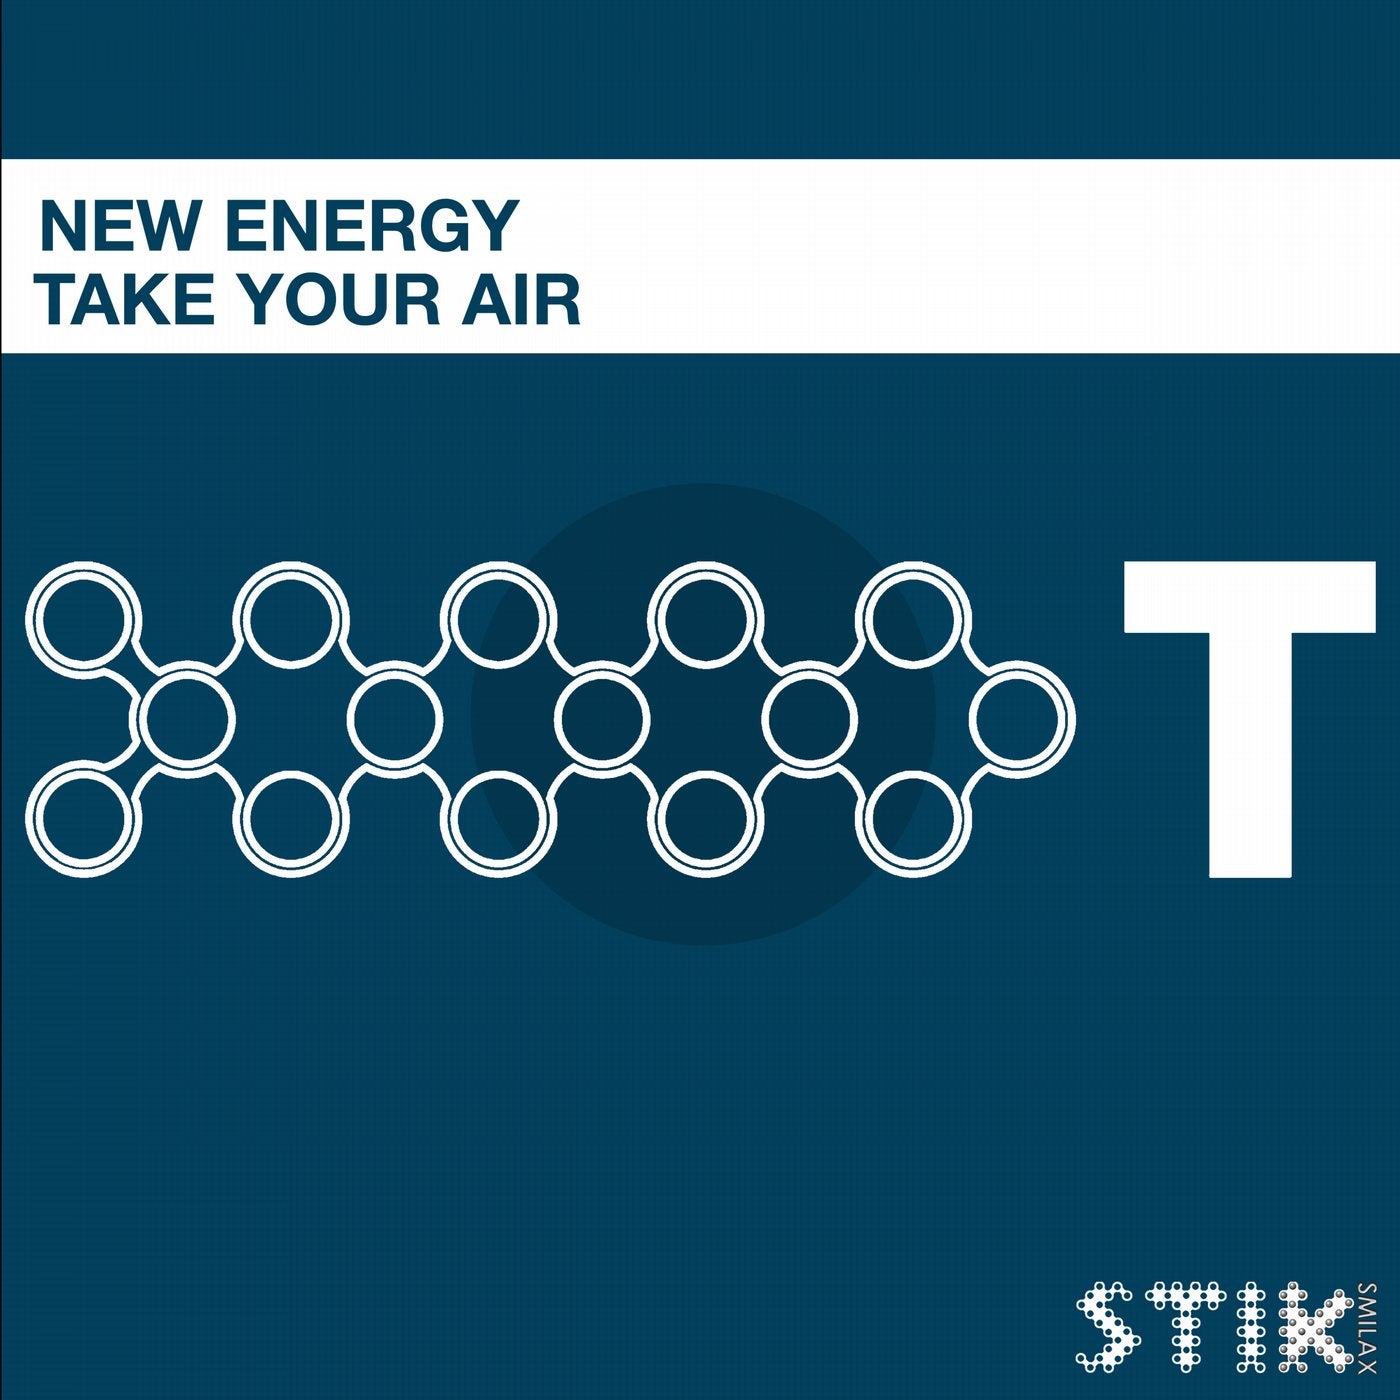 Take Your Air